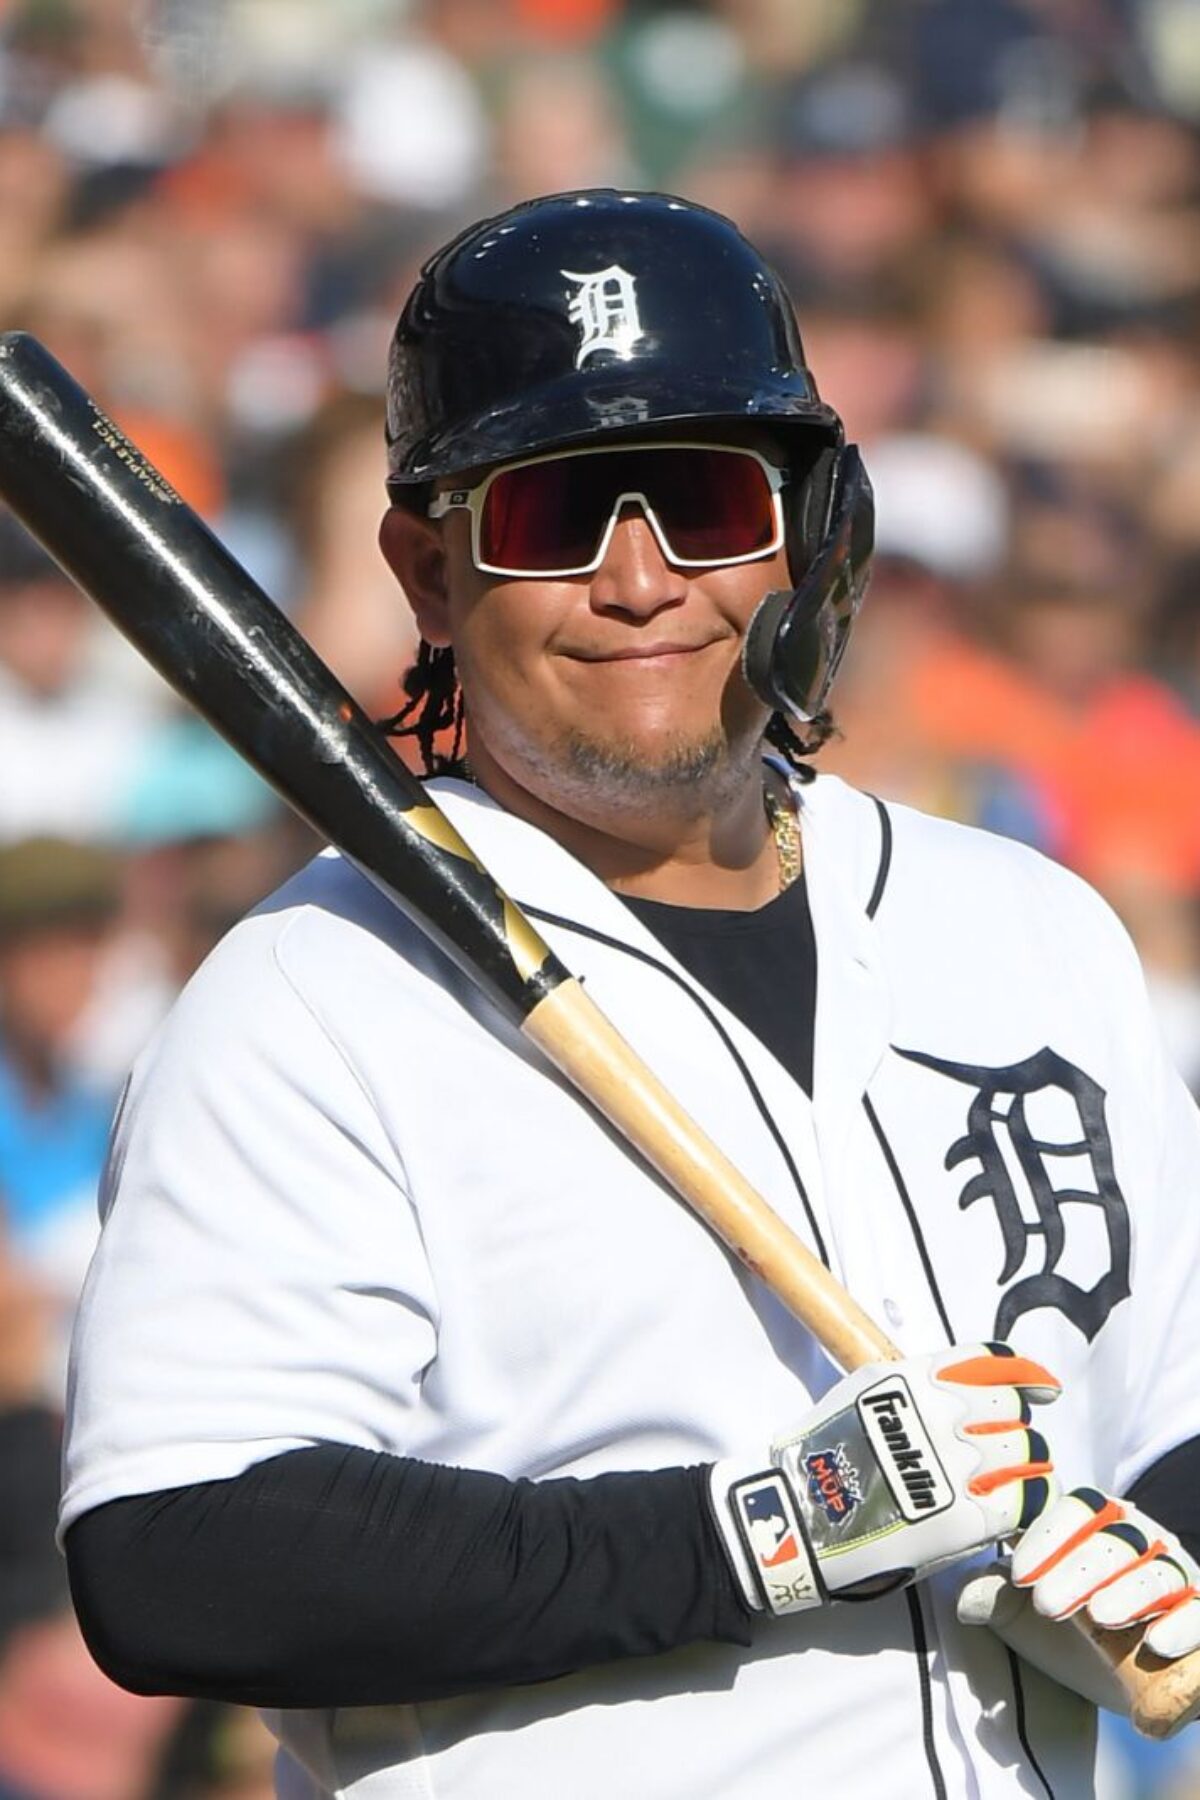 DETROIT, MI - OCTOBER 01: Miguel Cabrera #24 of the Detroit Tigers looks on and smiles while waiting on-deck to bat during the game against the Cleveland Guardians at Comerica Park on October 1, 2023 in Detroit, Michigan. The Tigers defeated the Guardians 5-2. Today was Cabreras' final Major League game. (Photo by Mark Cunningham/MLB Photos via Getty Images)